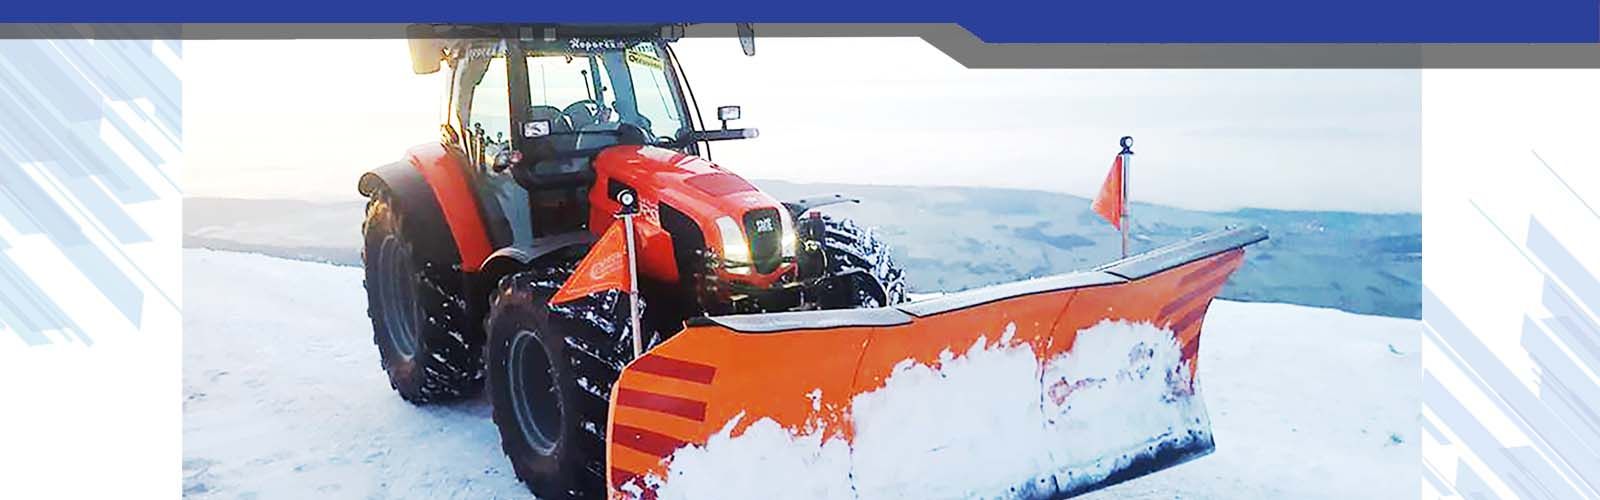 Snow service machines for winter roads snow ploughs